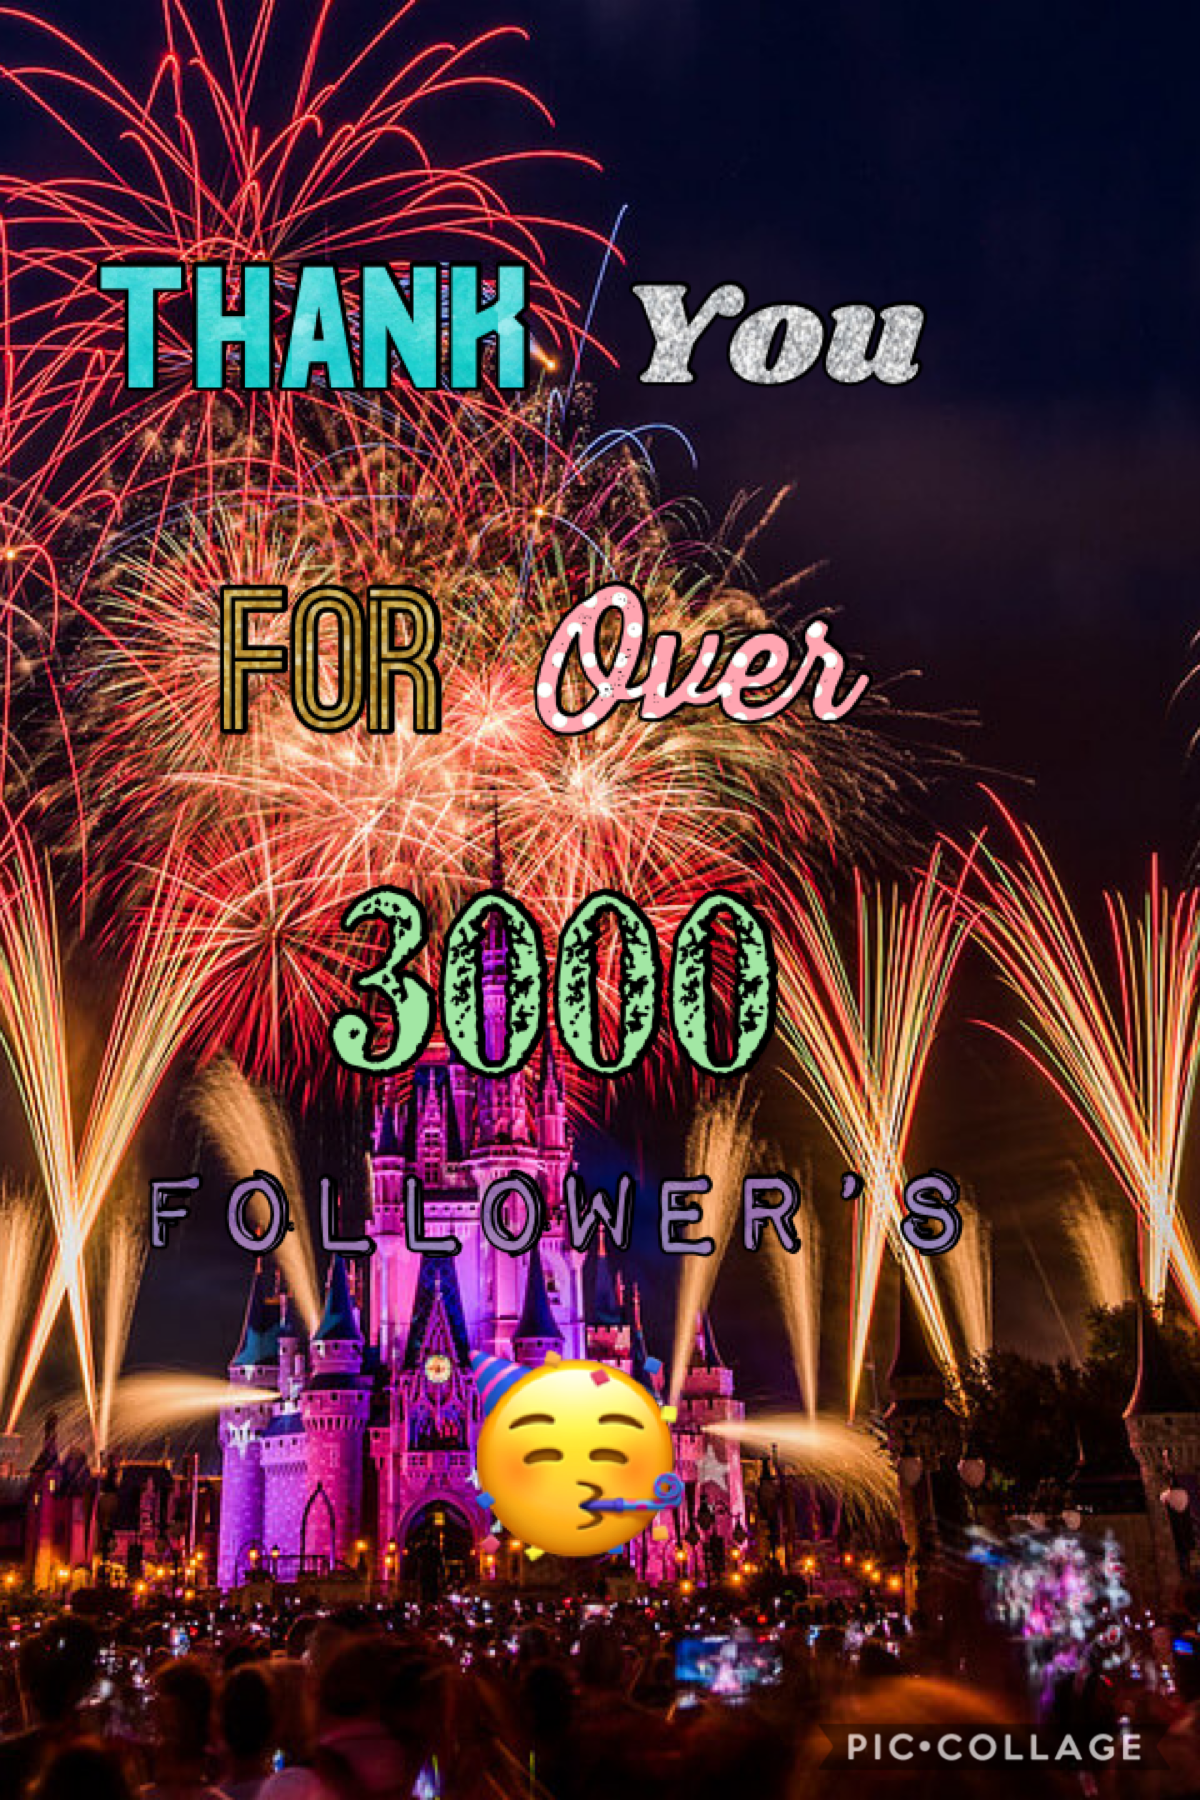 Thank you for over 3000 followers 